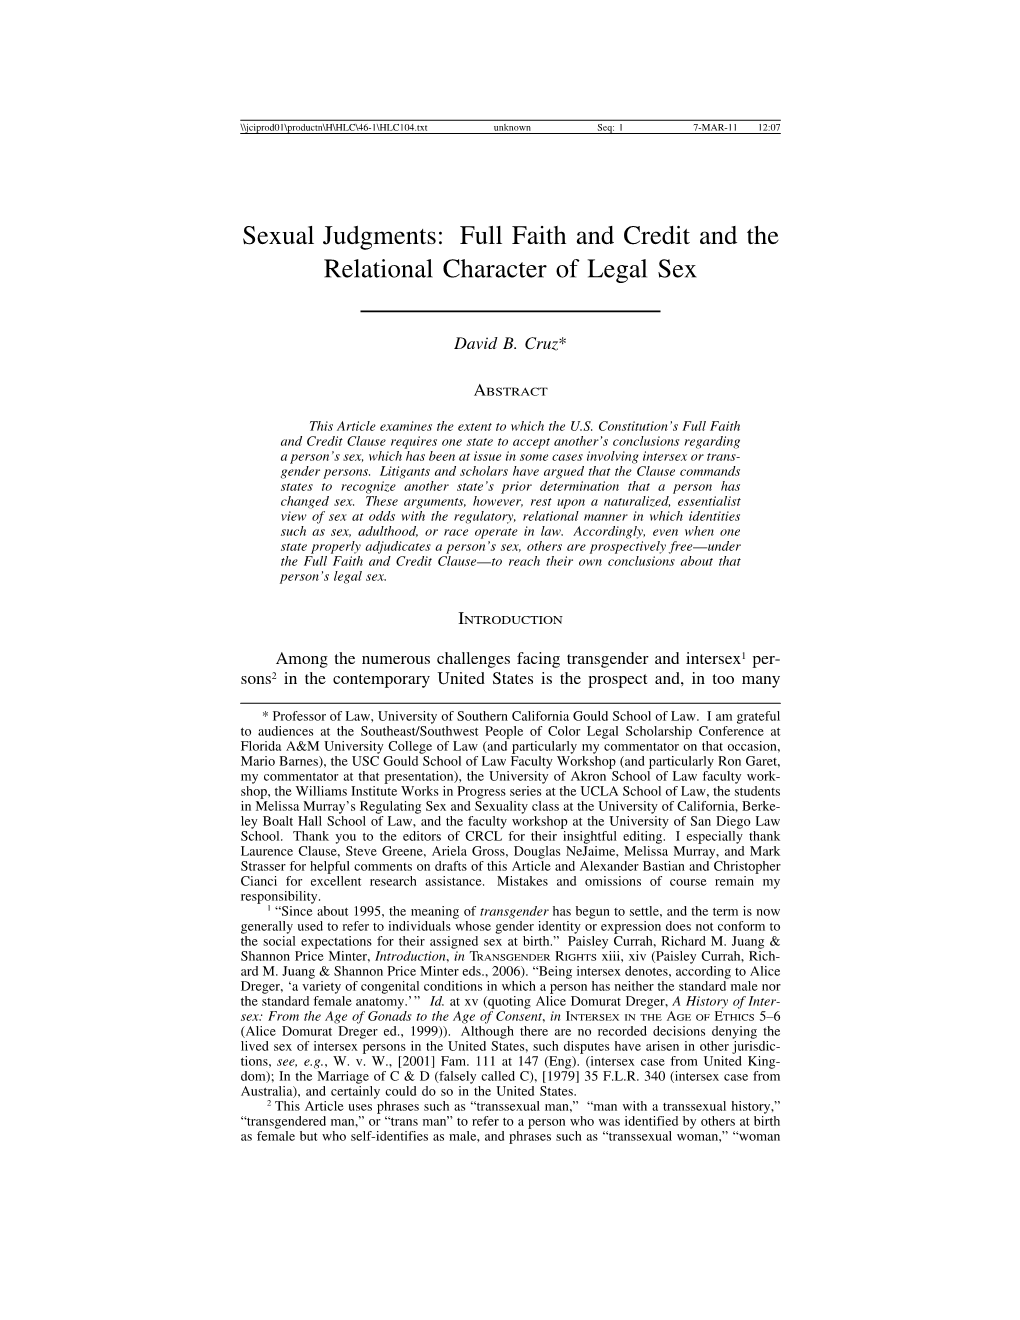 Full Faith and Credit and the Relational Character of Legal Sex